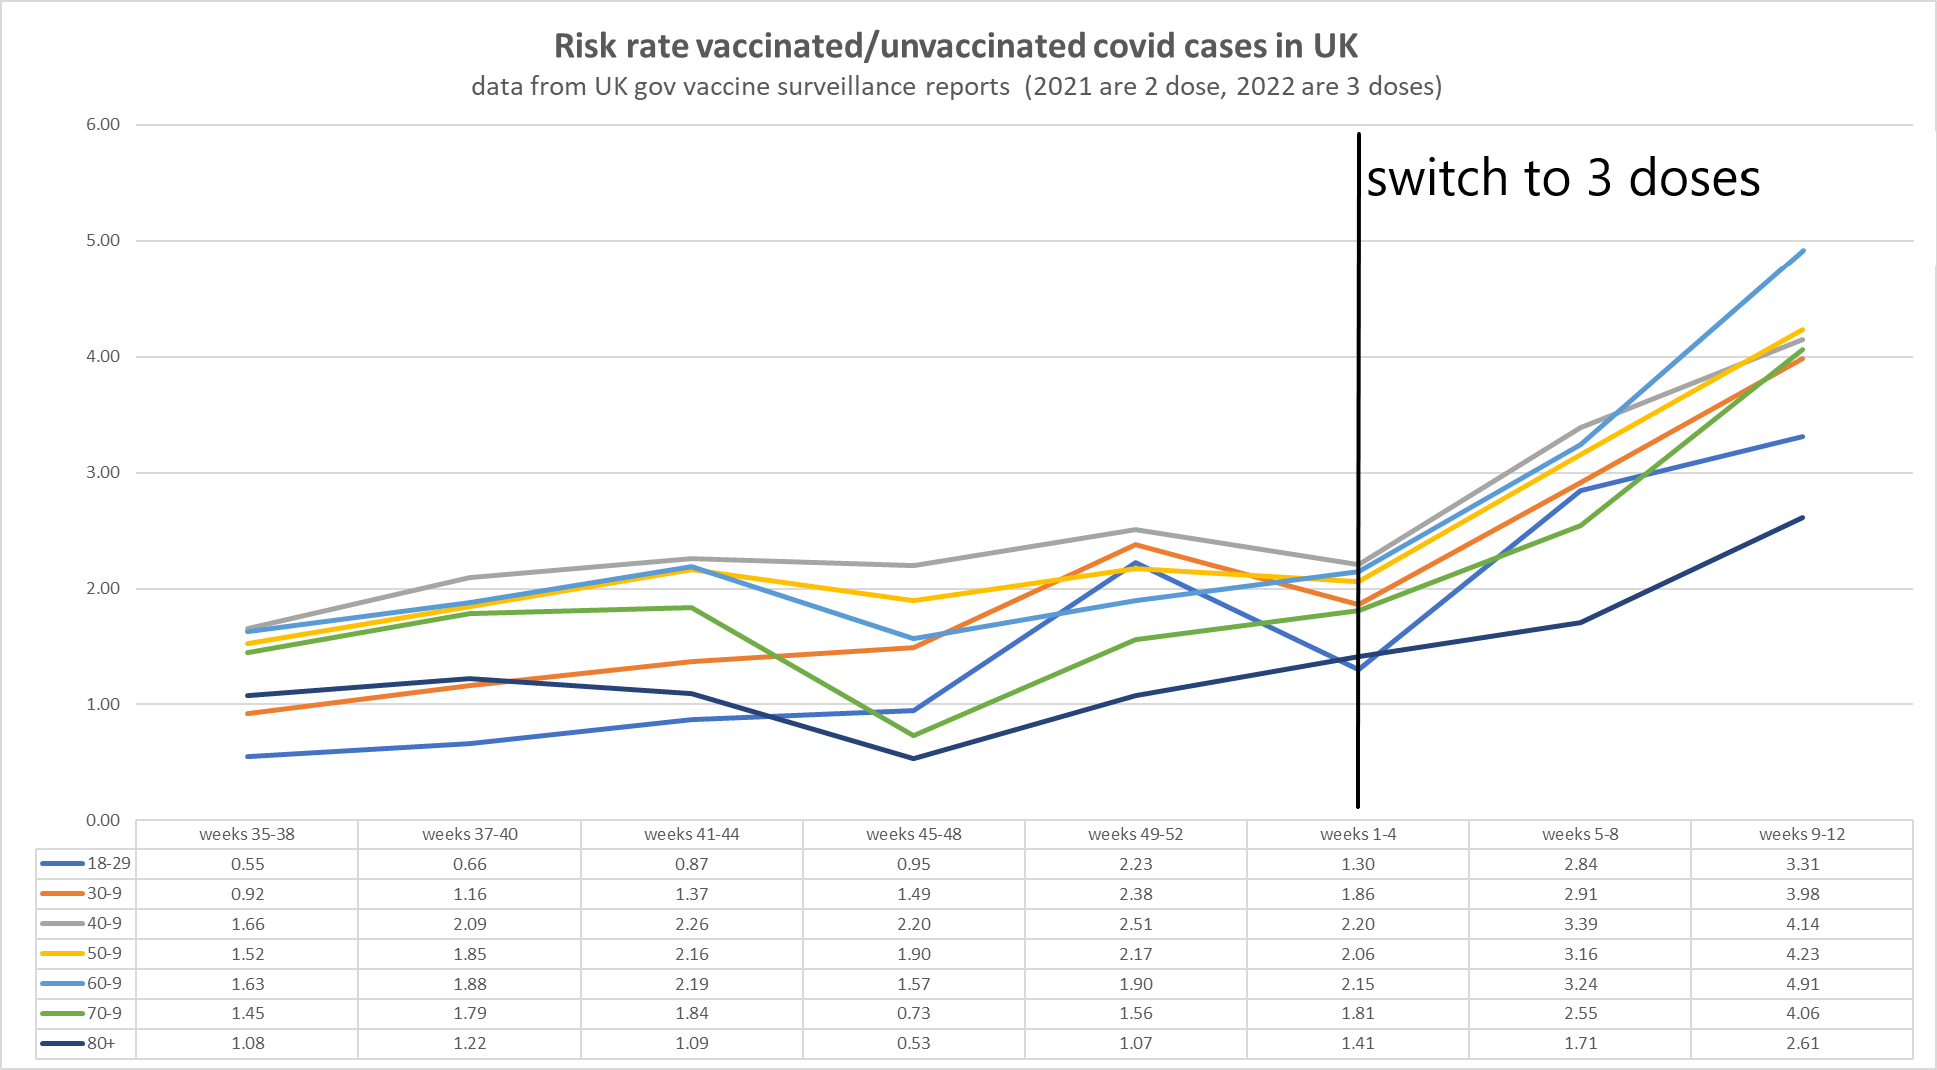 Vaccinated / Unvaccinated rate risk in UK